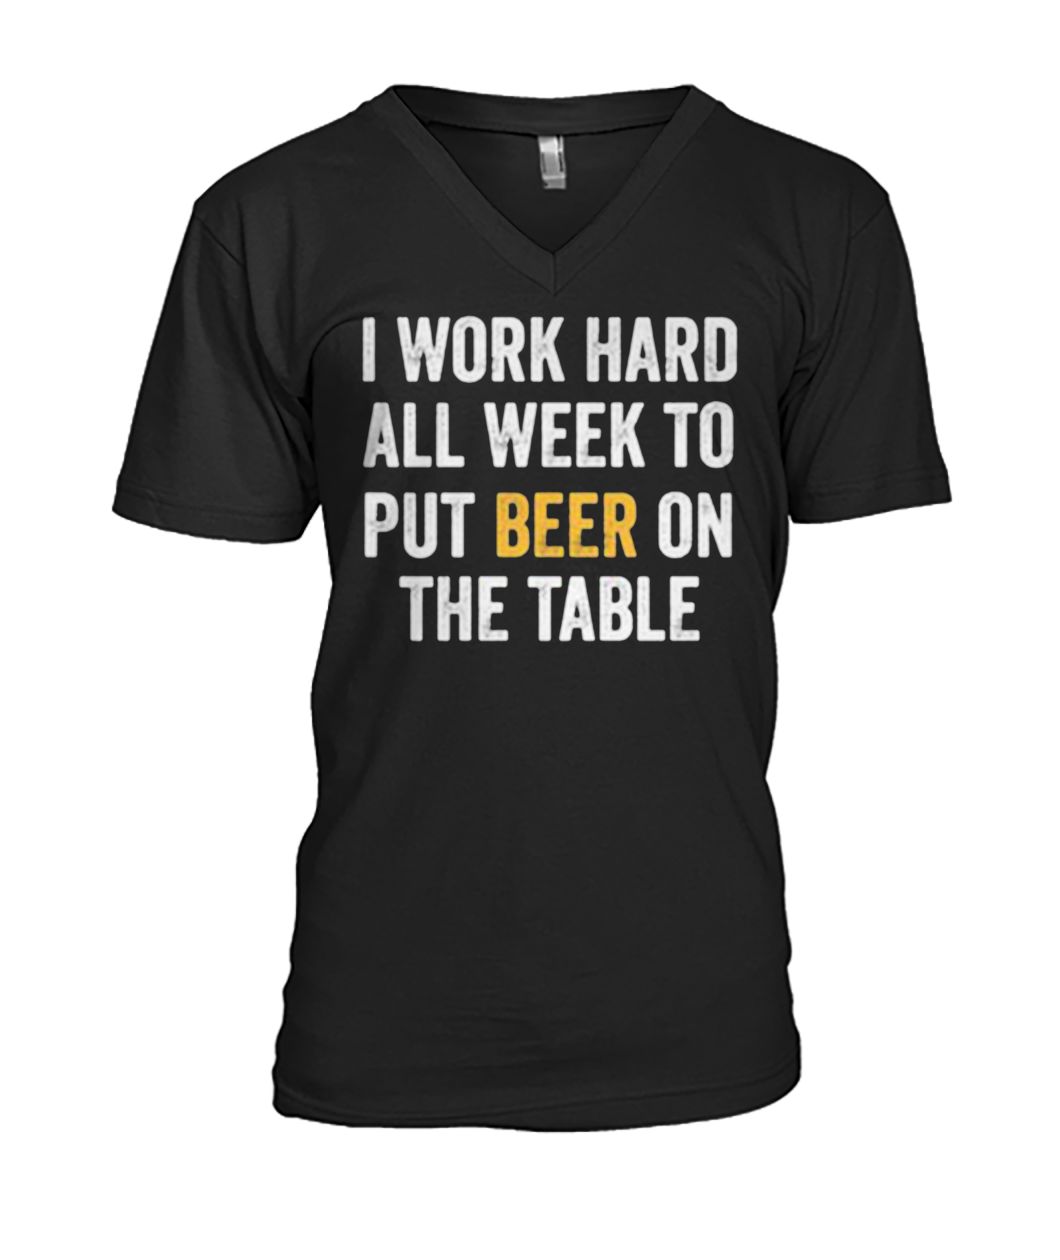 I work hard all week to put beer on the table mens v-neck